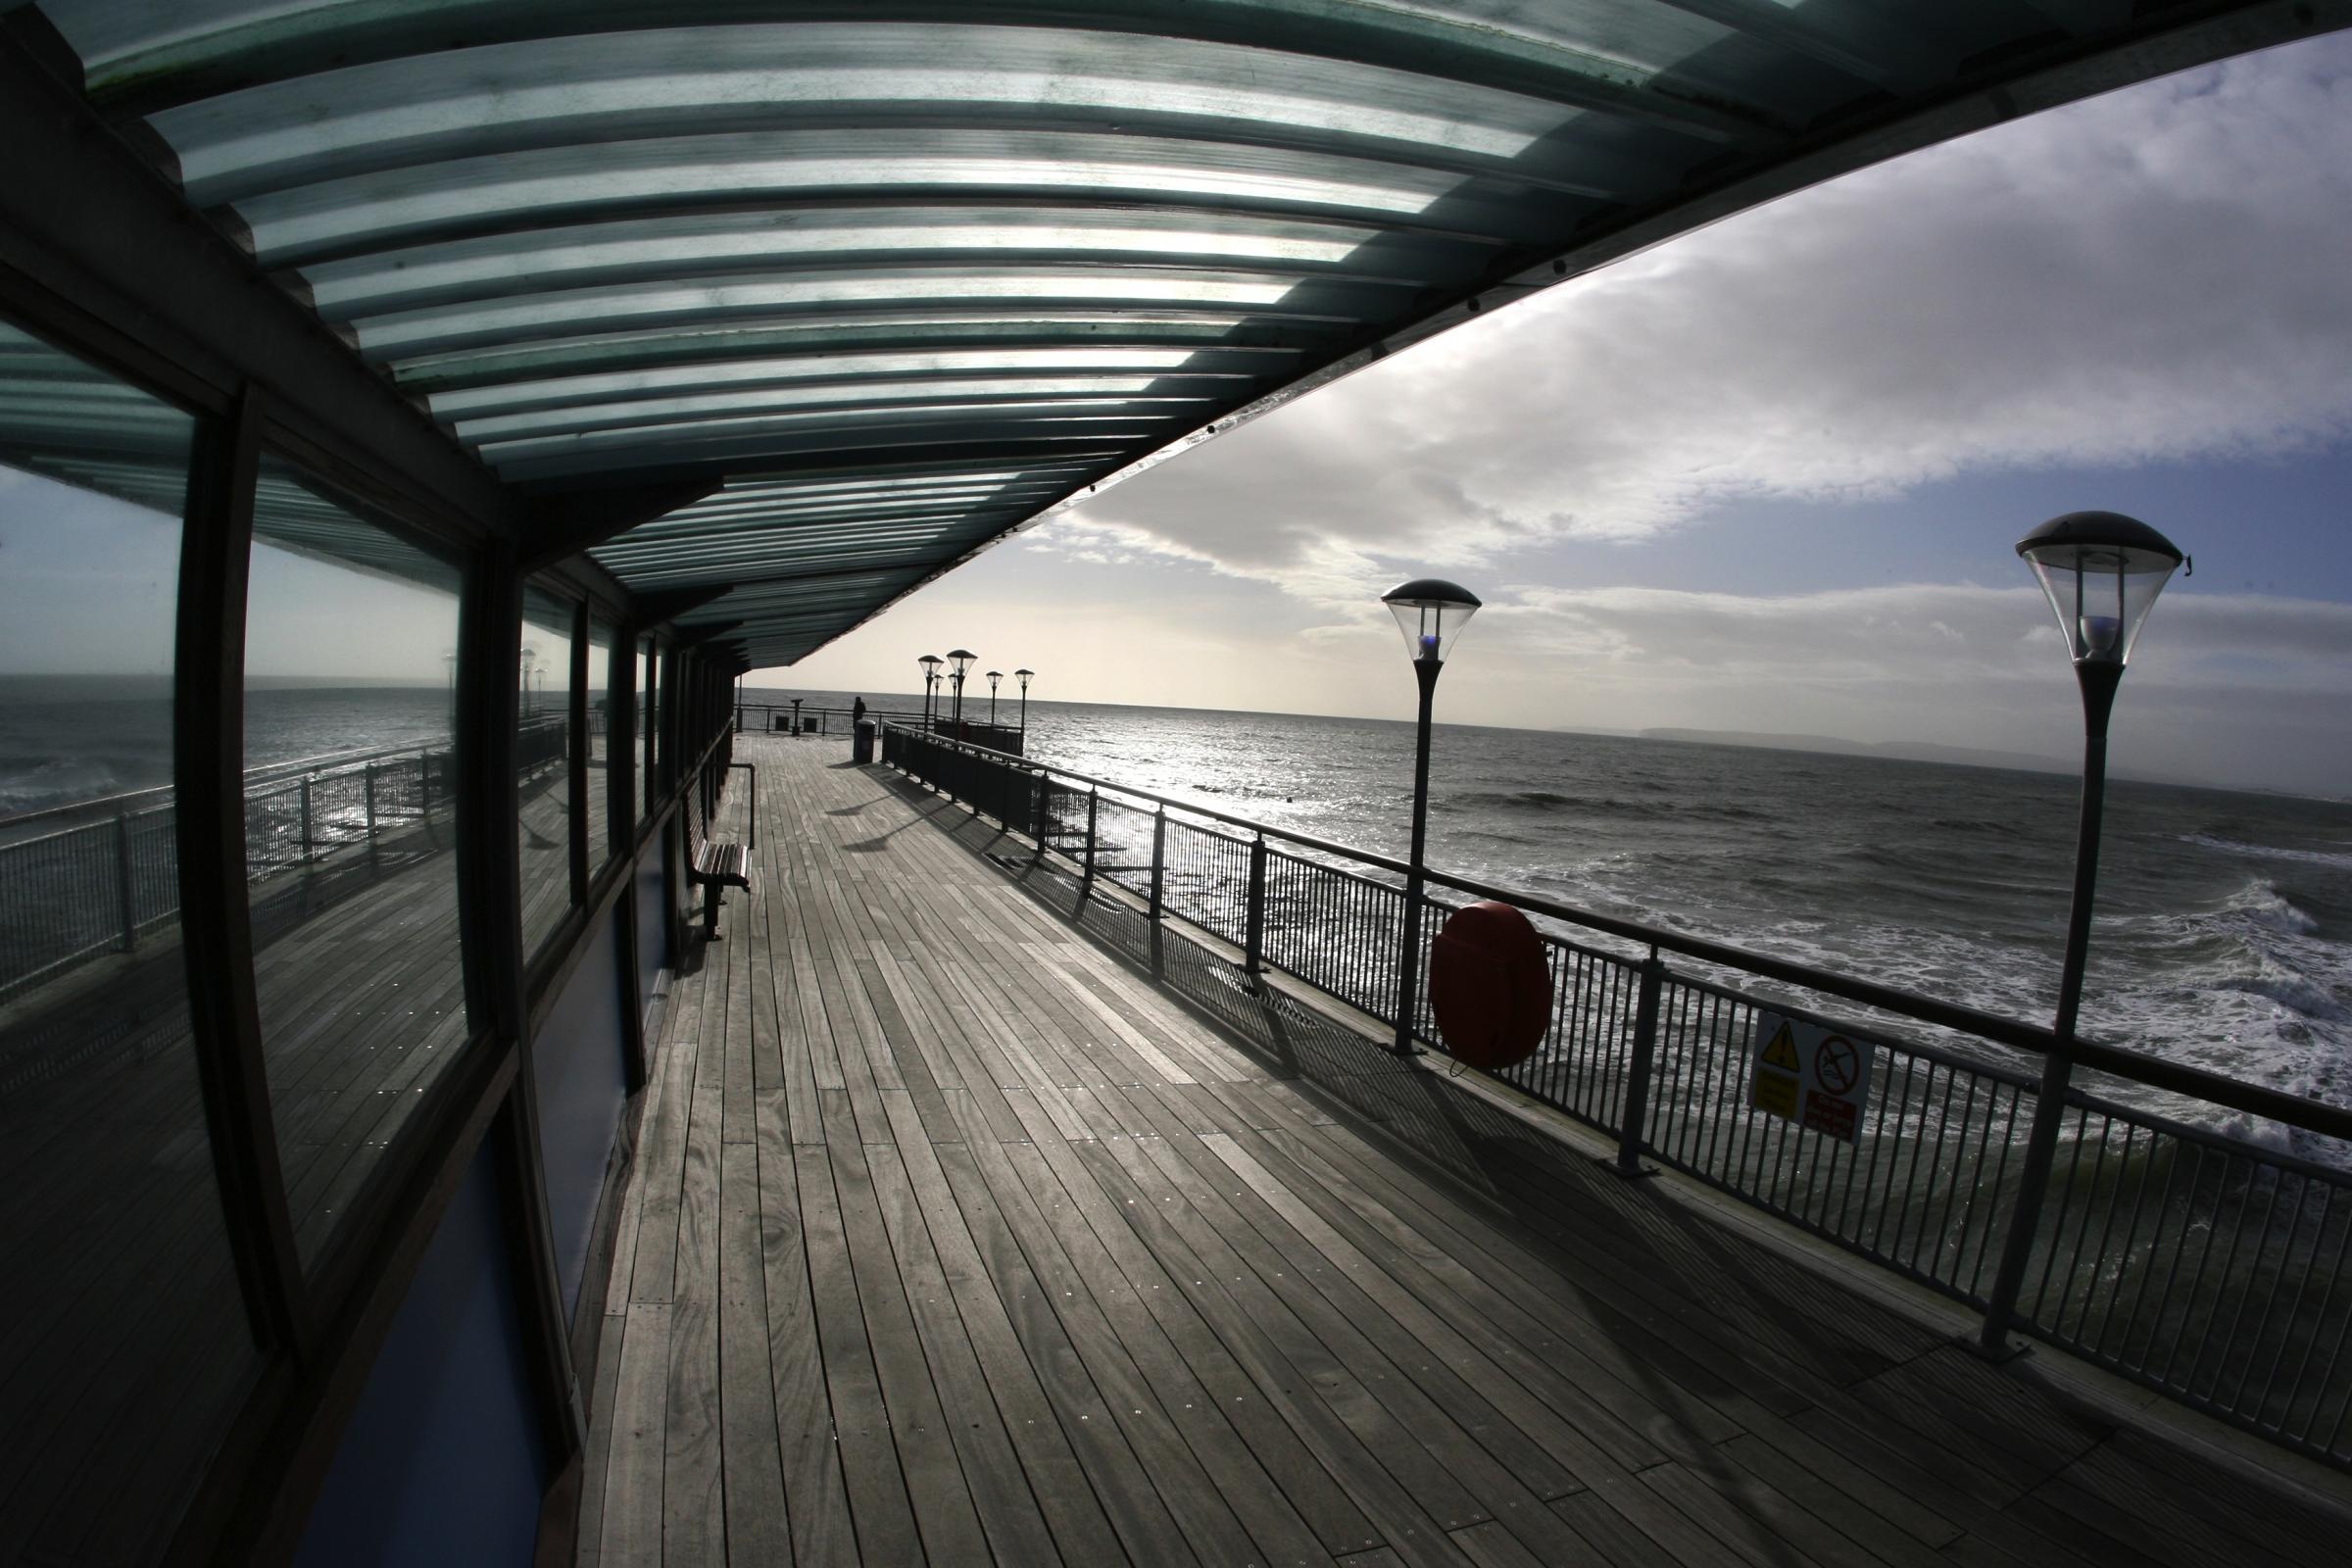 Boscombe Pier closed temporarily by police after concerns for man's welfare